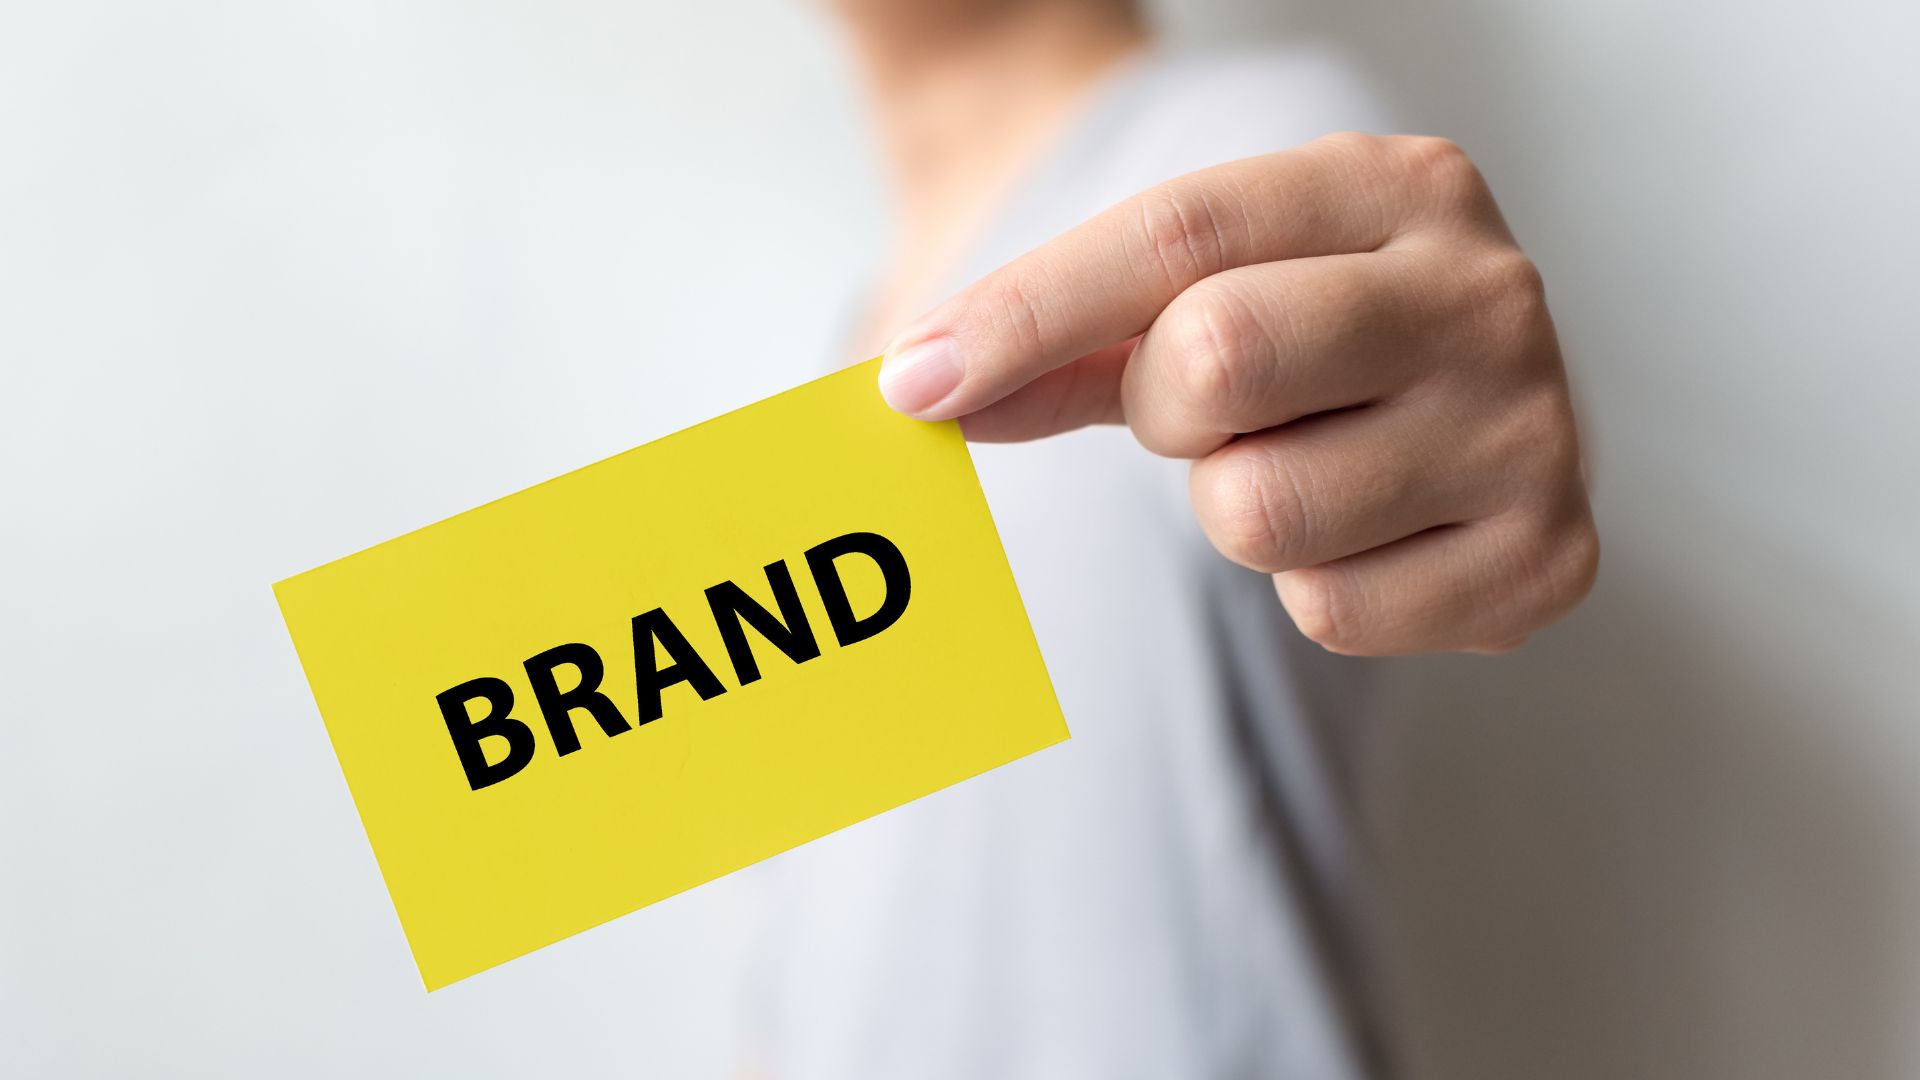 tag brands in your post